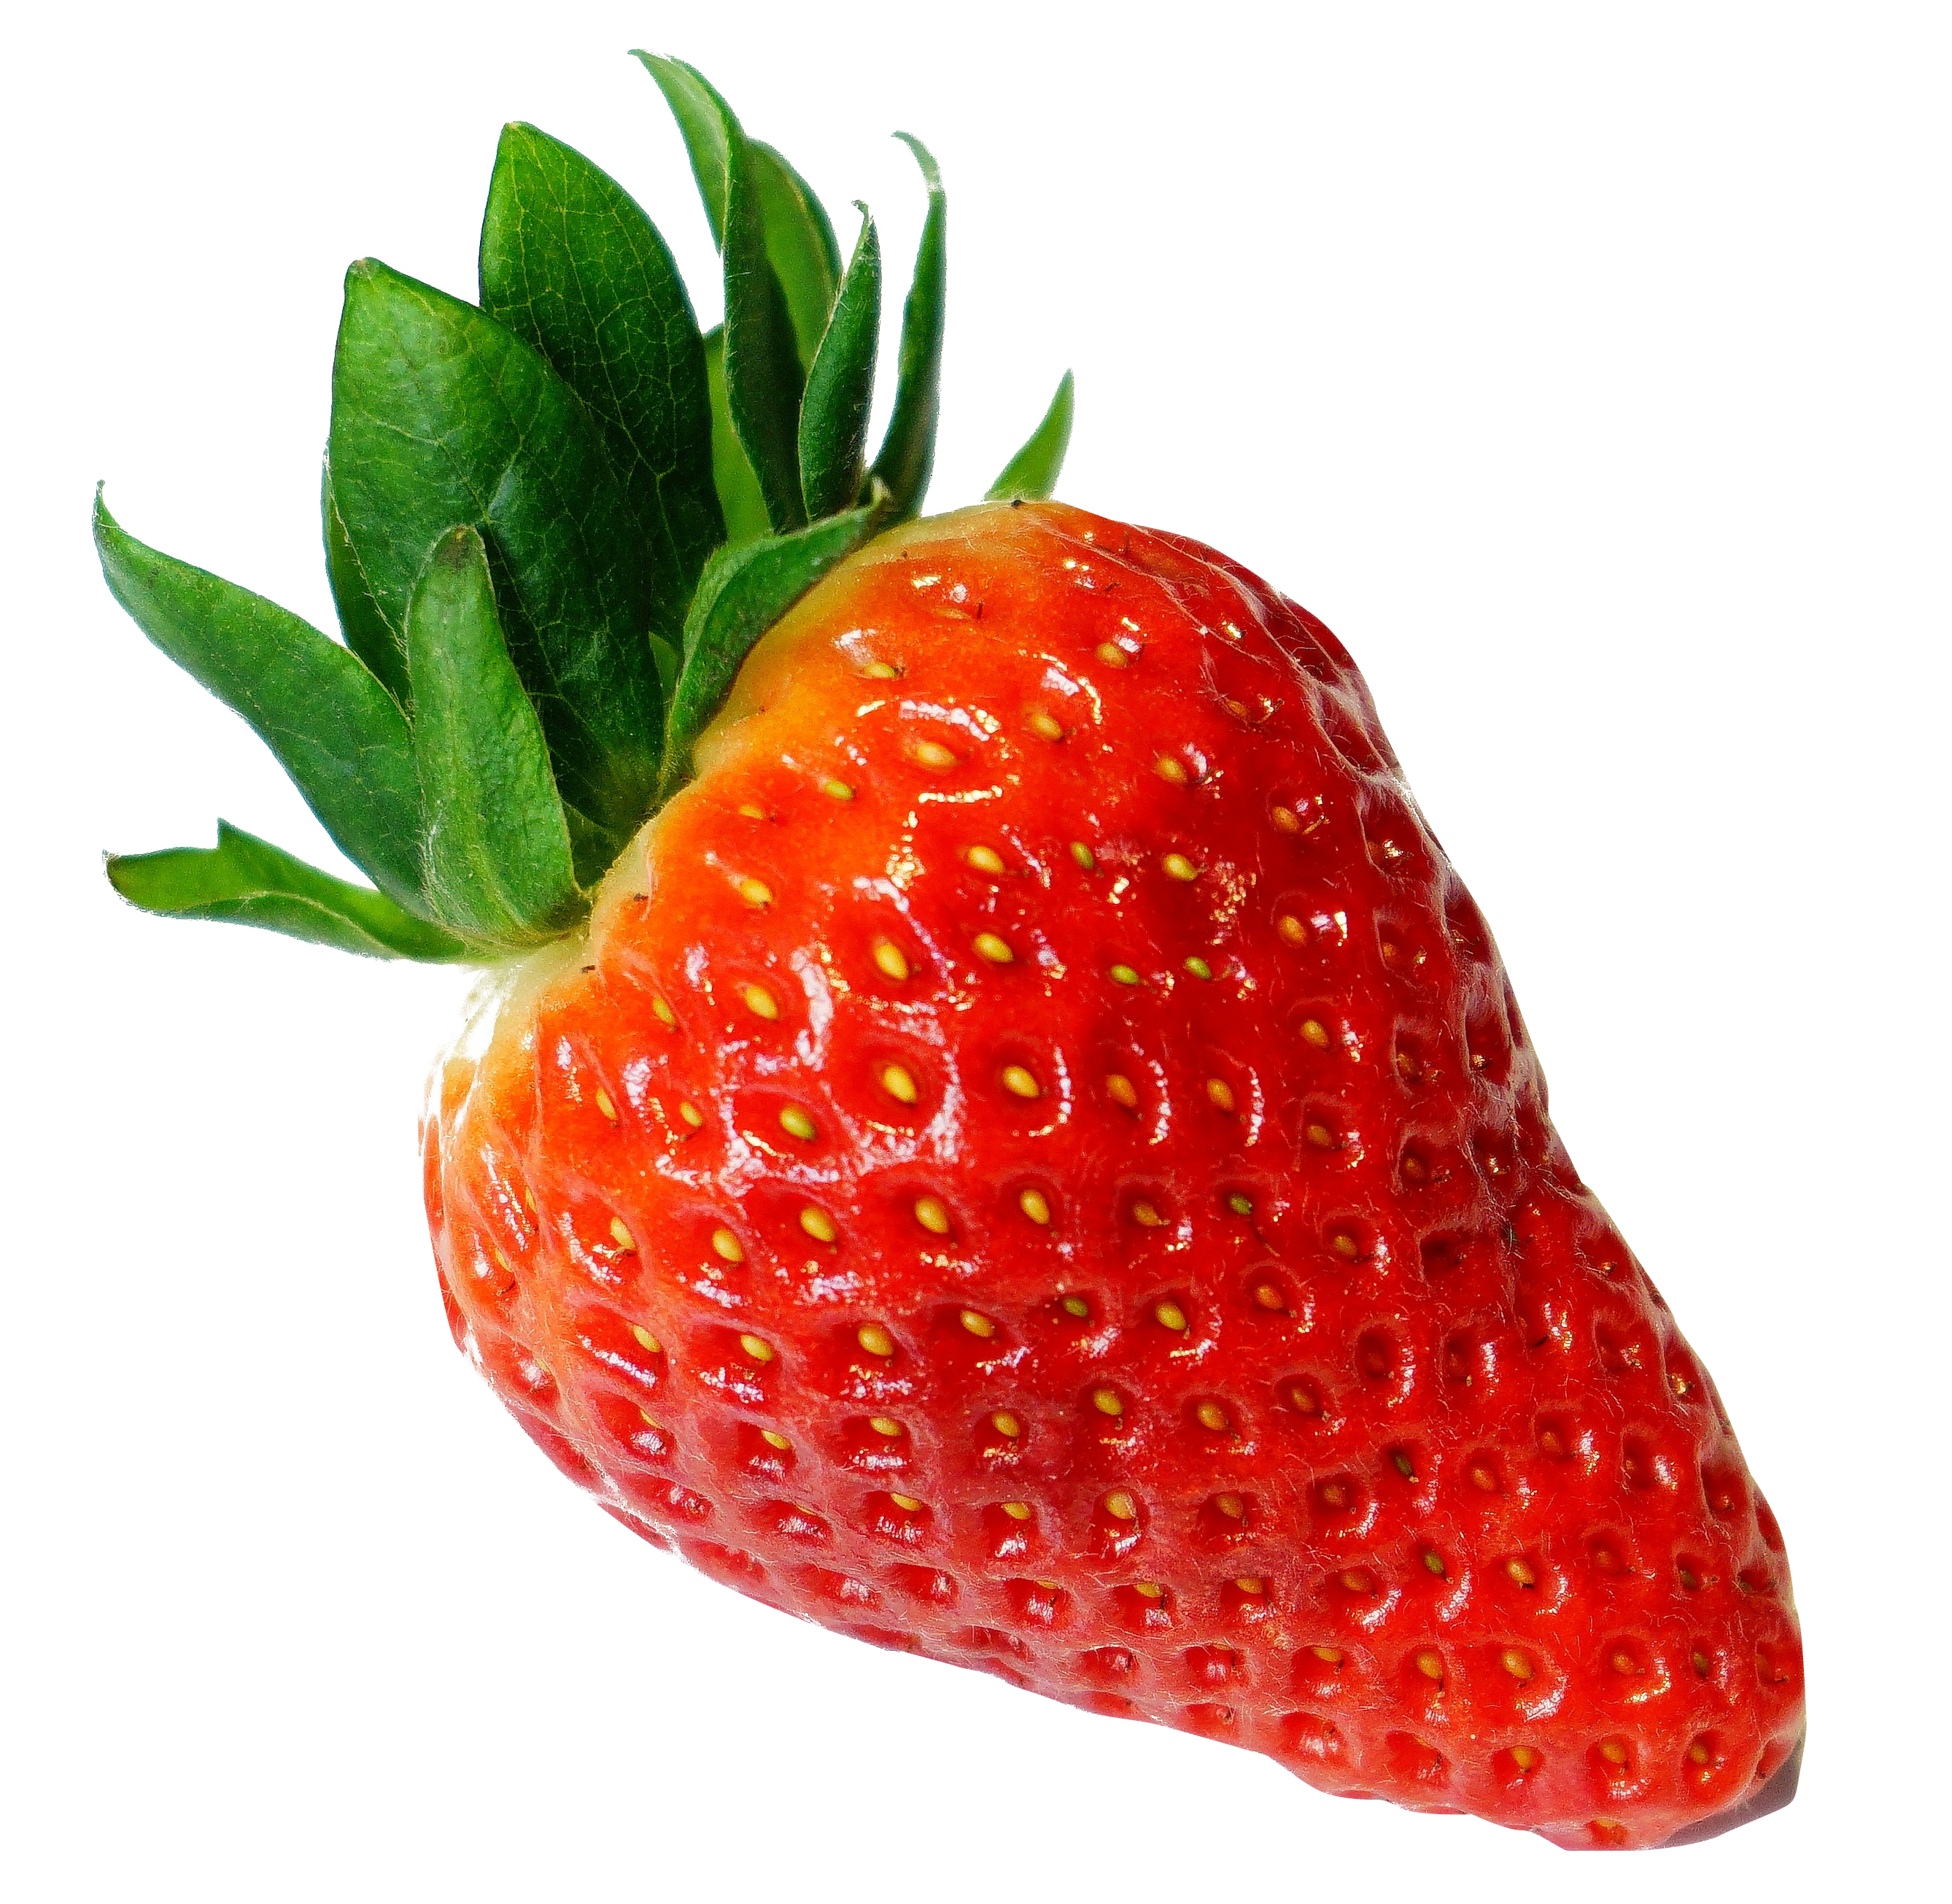 Hq strawberry png transparent. Strawberries clipart four